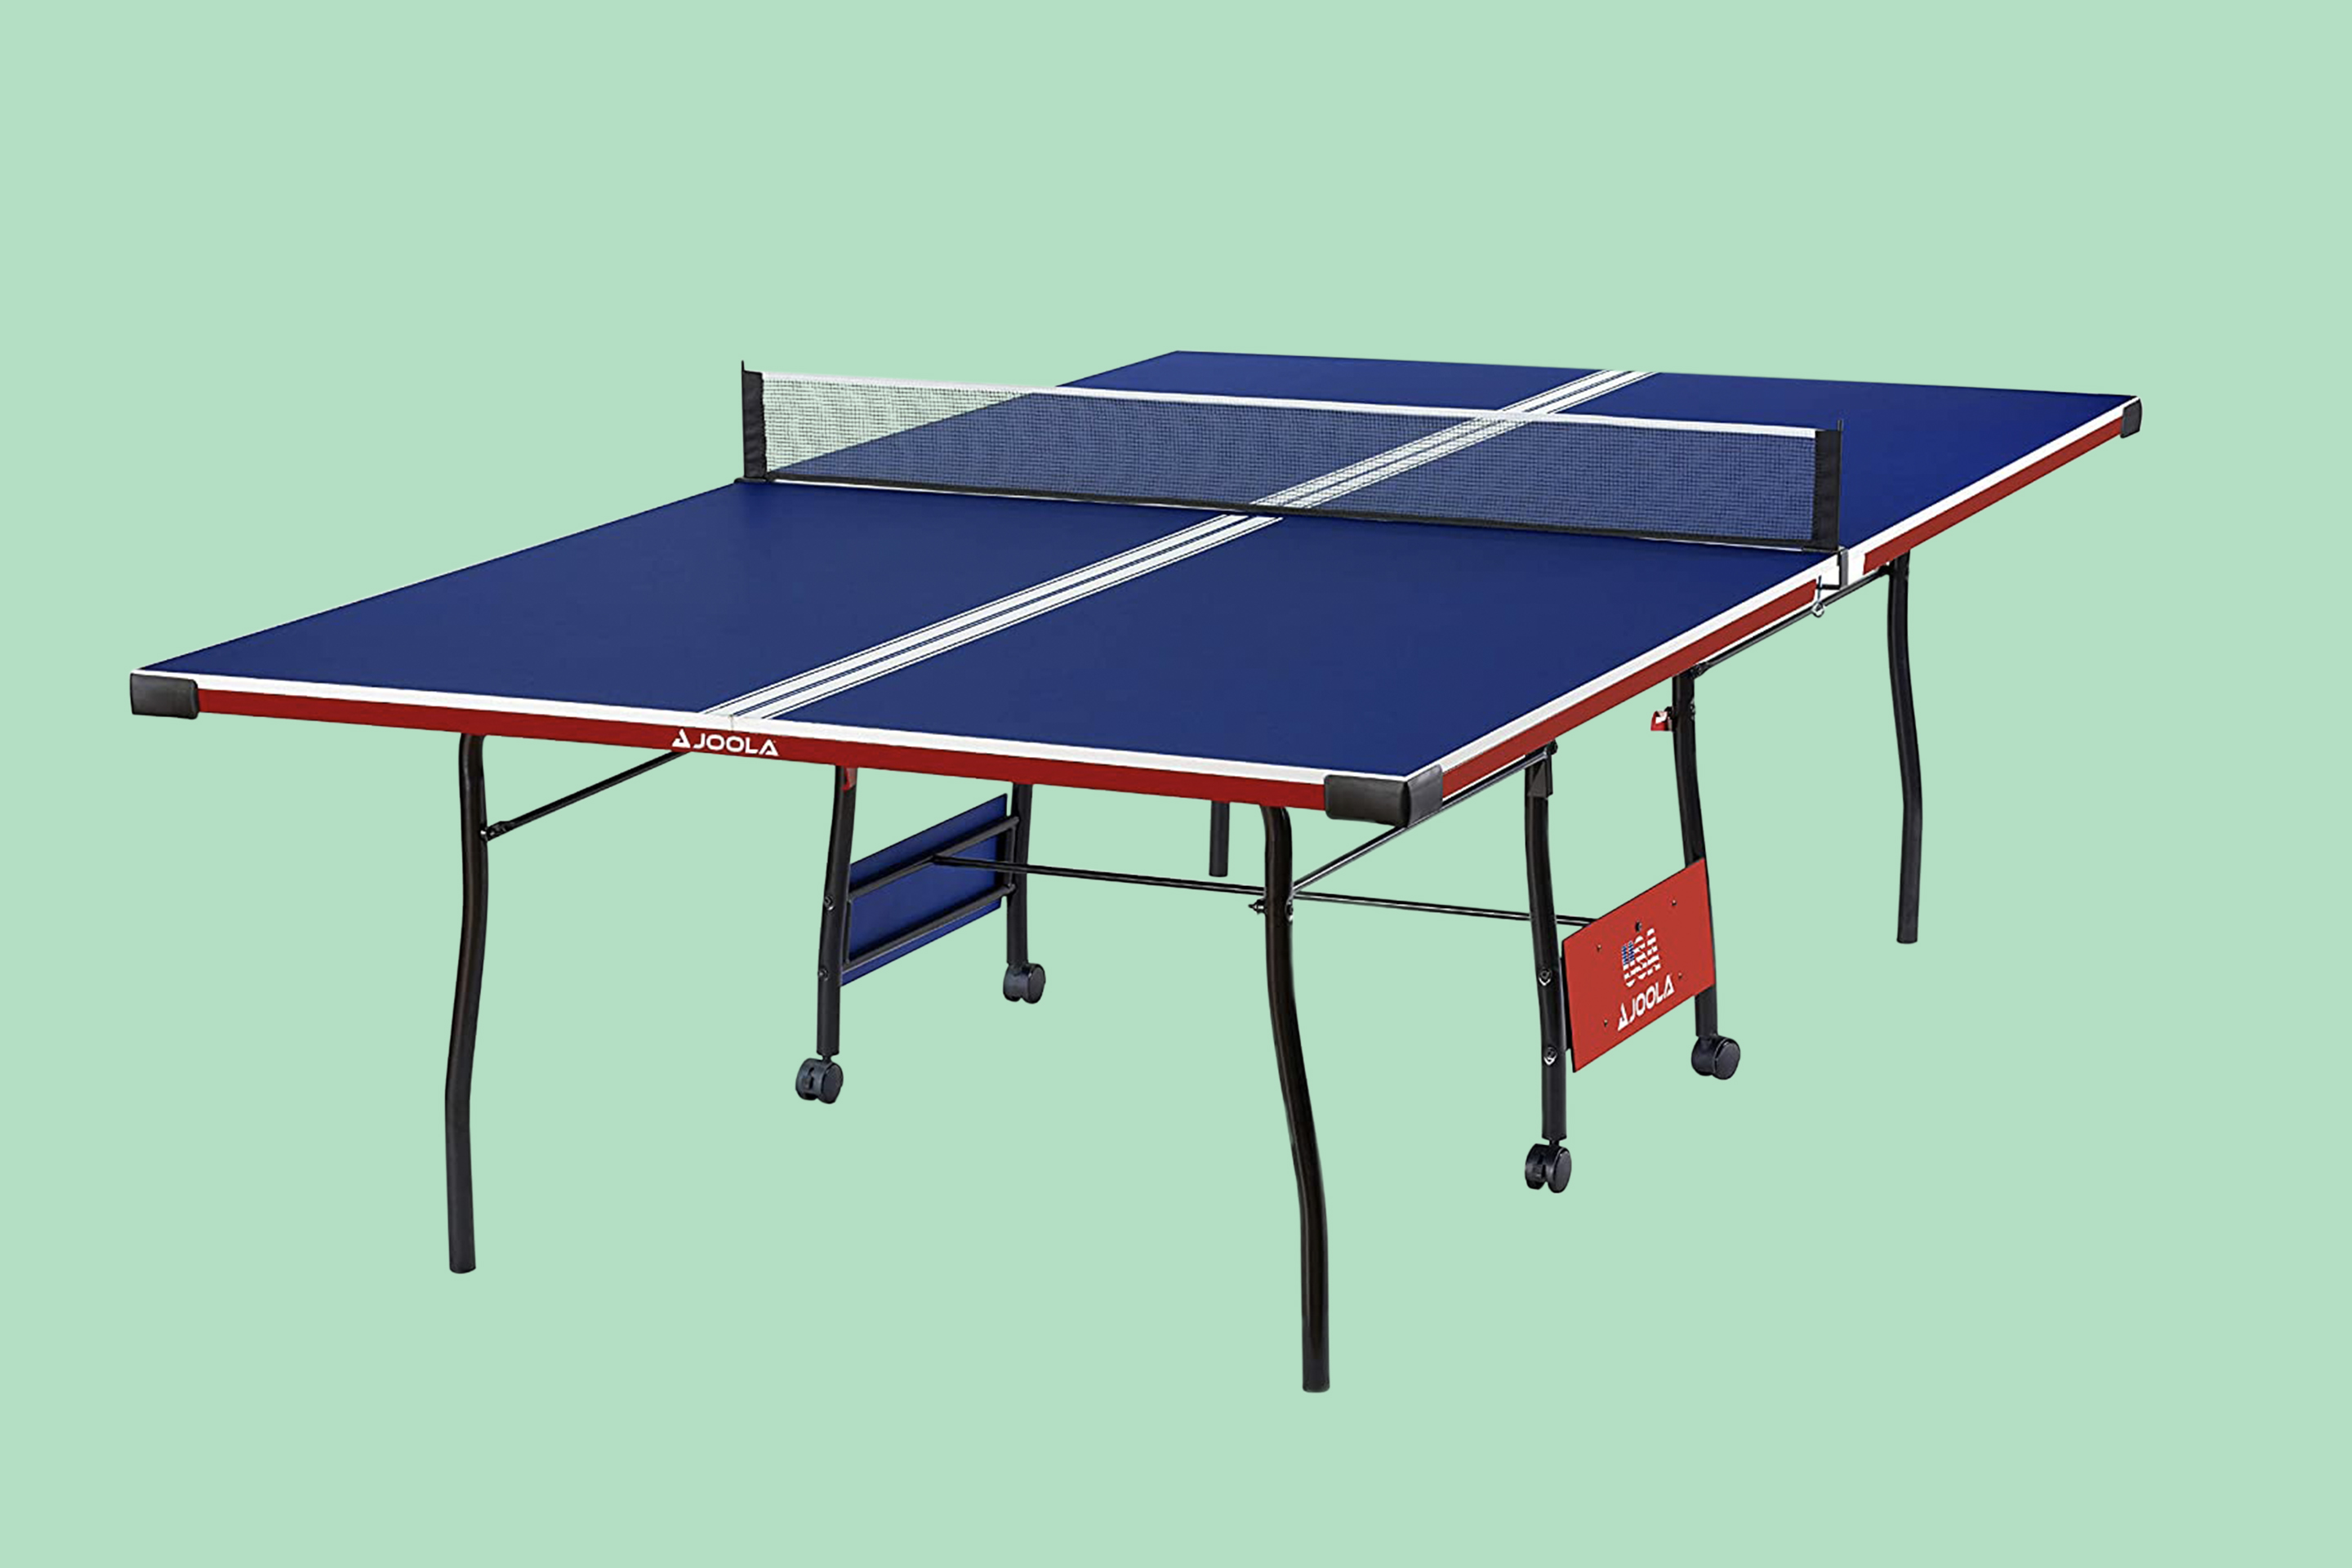 The Best Ping-Pong Tables Money